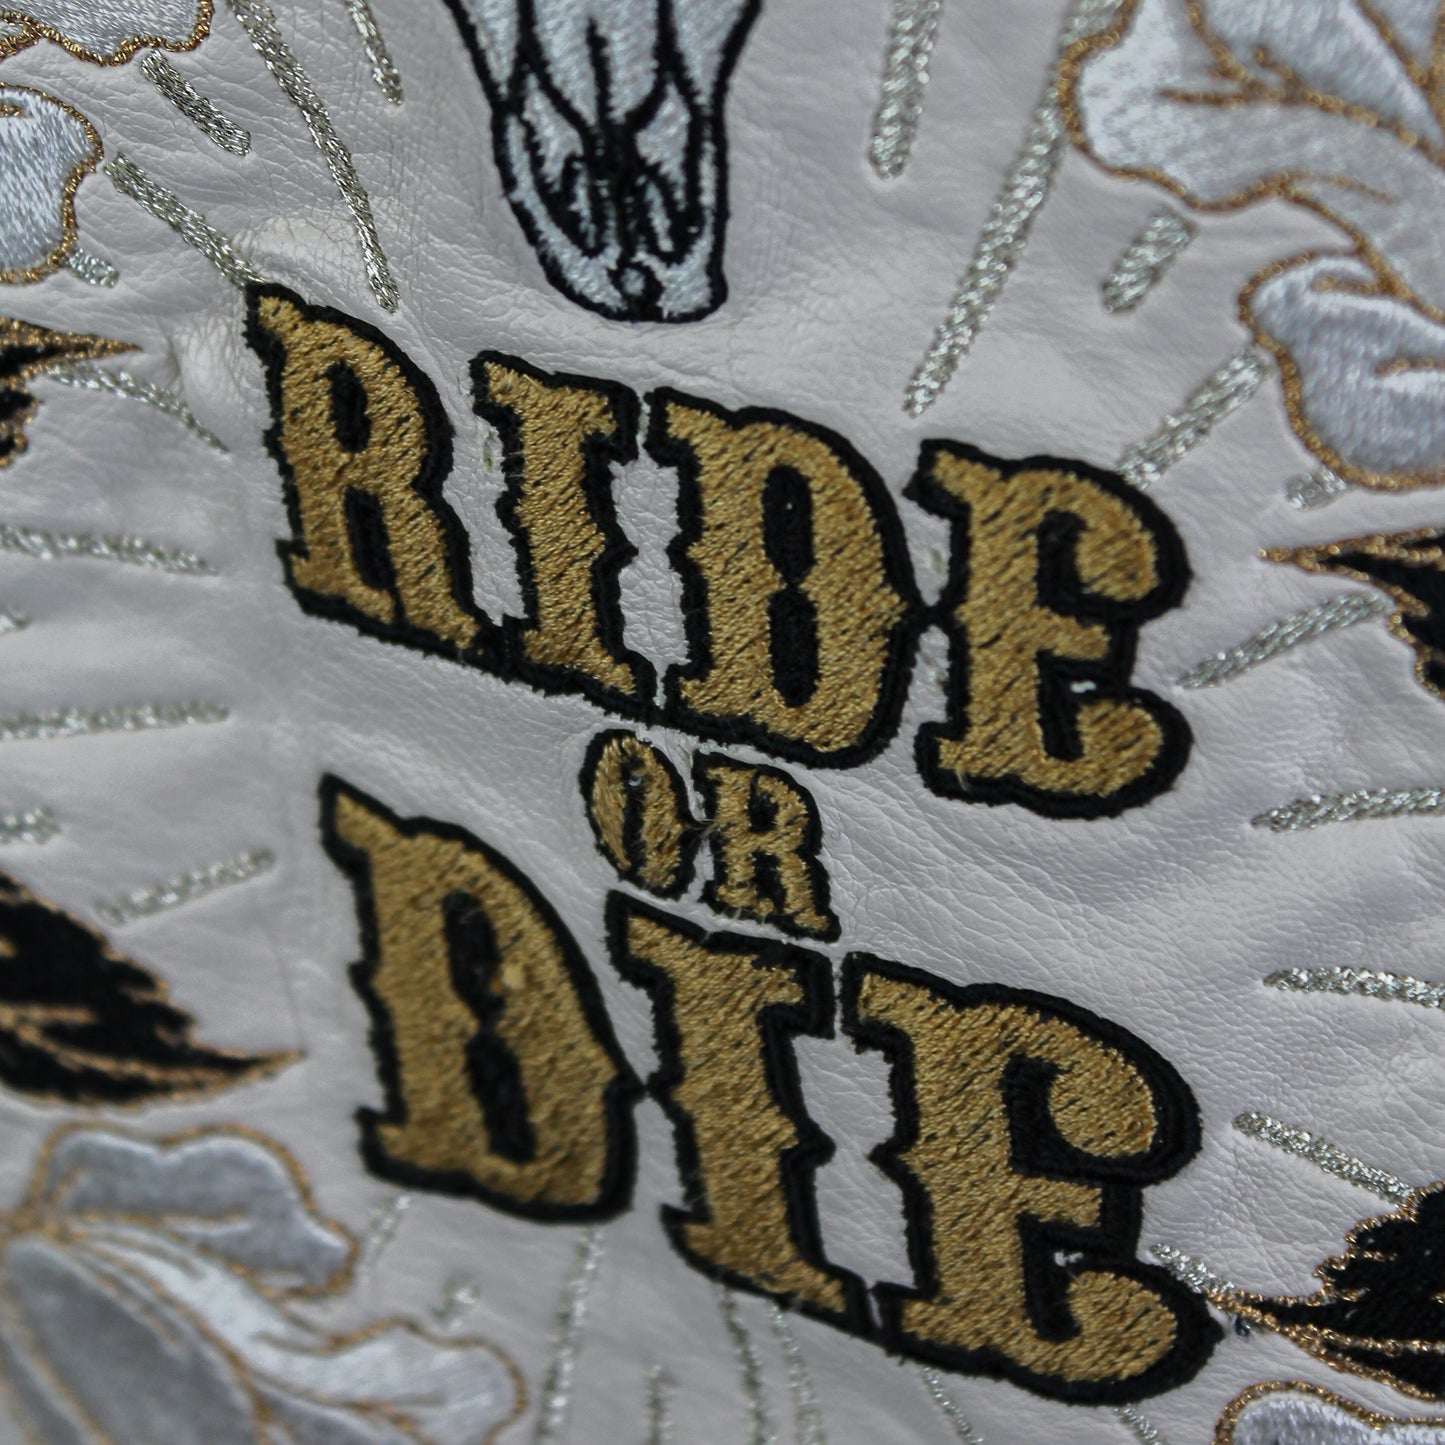 Chic Western 'Ride or Die' Wedding Jacket: Elevate your bridal style with this ecru cover-up, blending the bold spirit of the Wild West with delicate embroidery for a unique and stylish statement